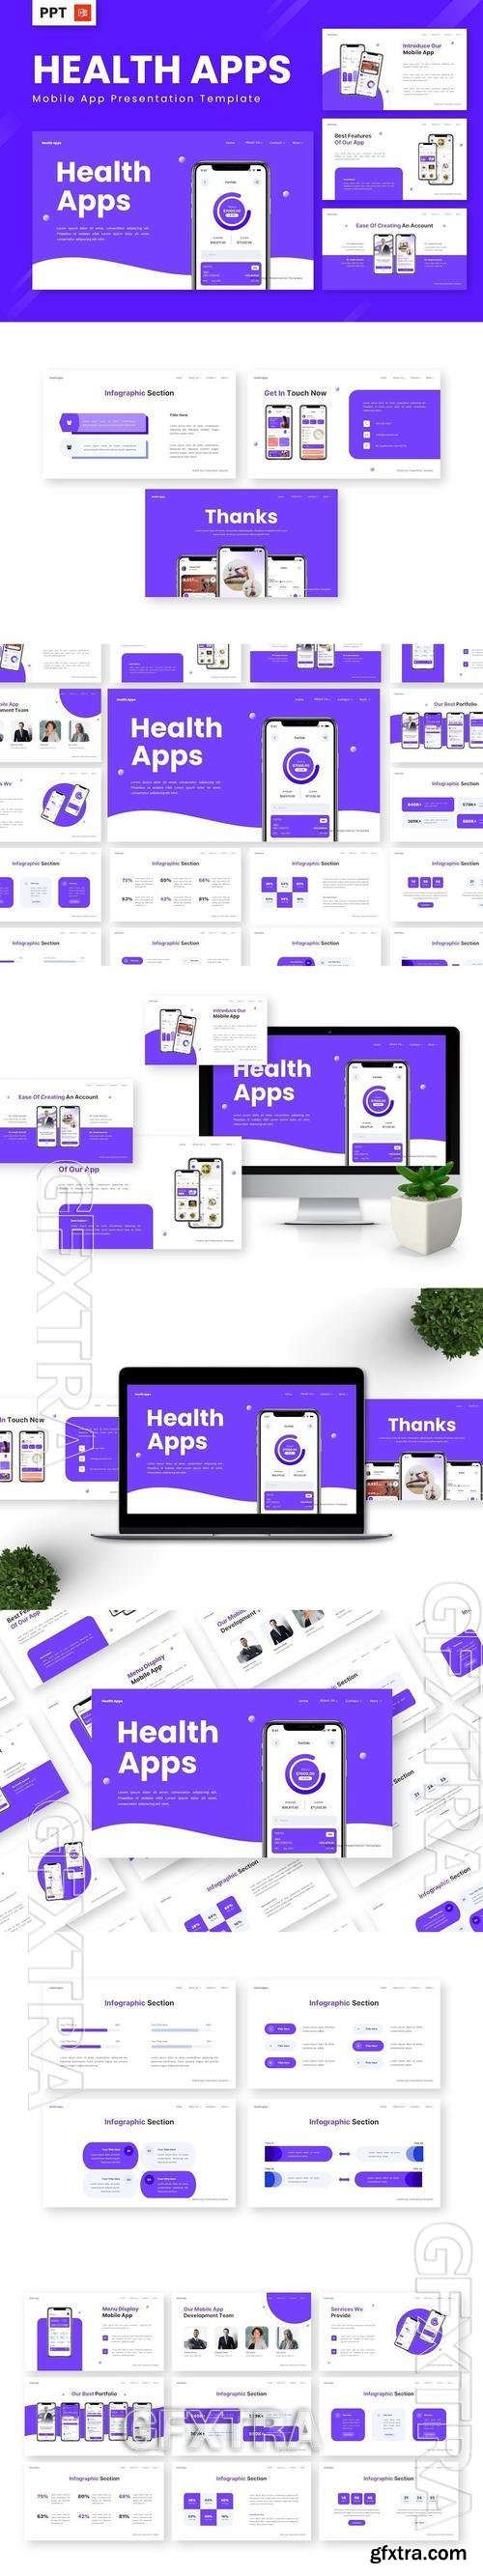 Health Apps - Mobile App Powerpoint Templates SGN8LEV